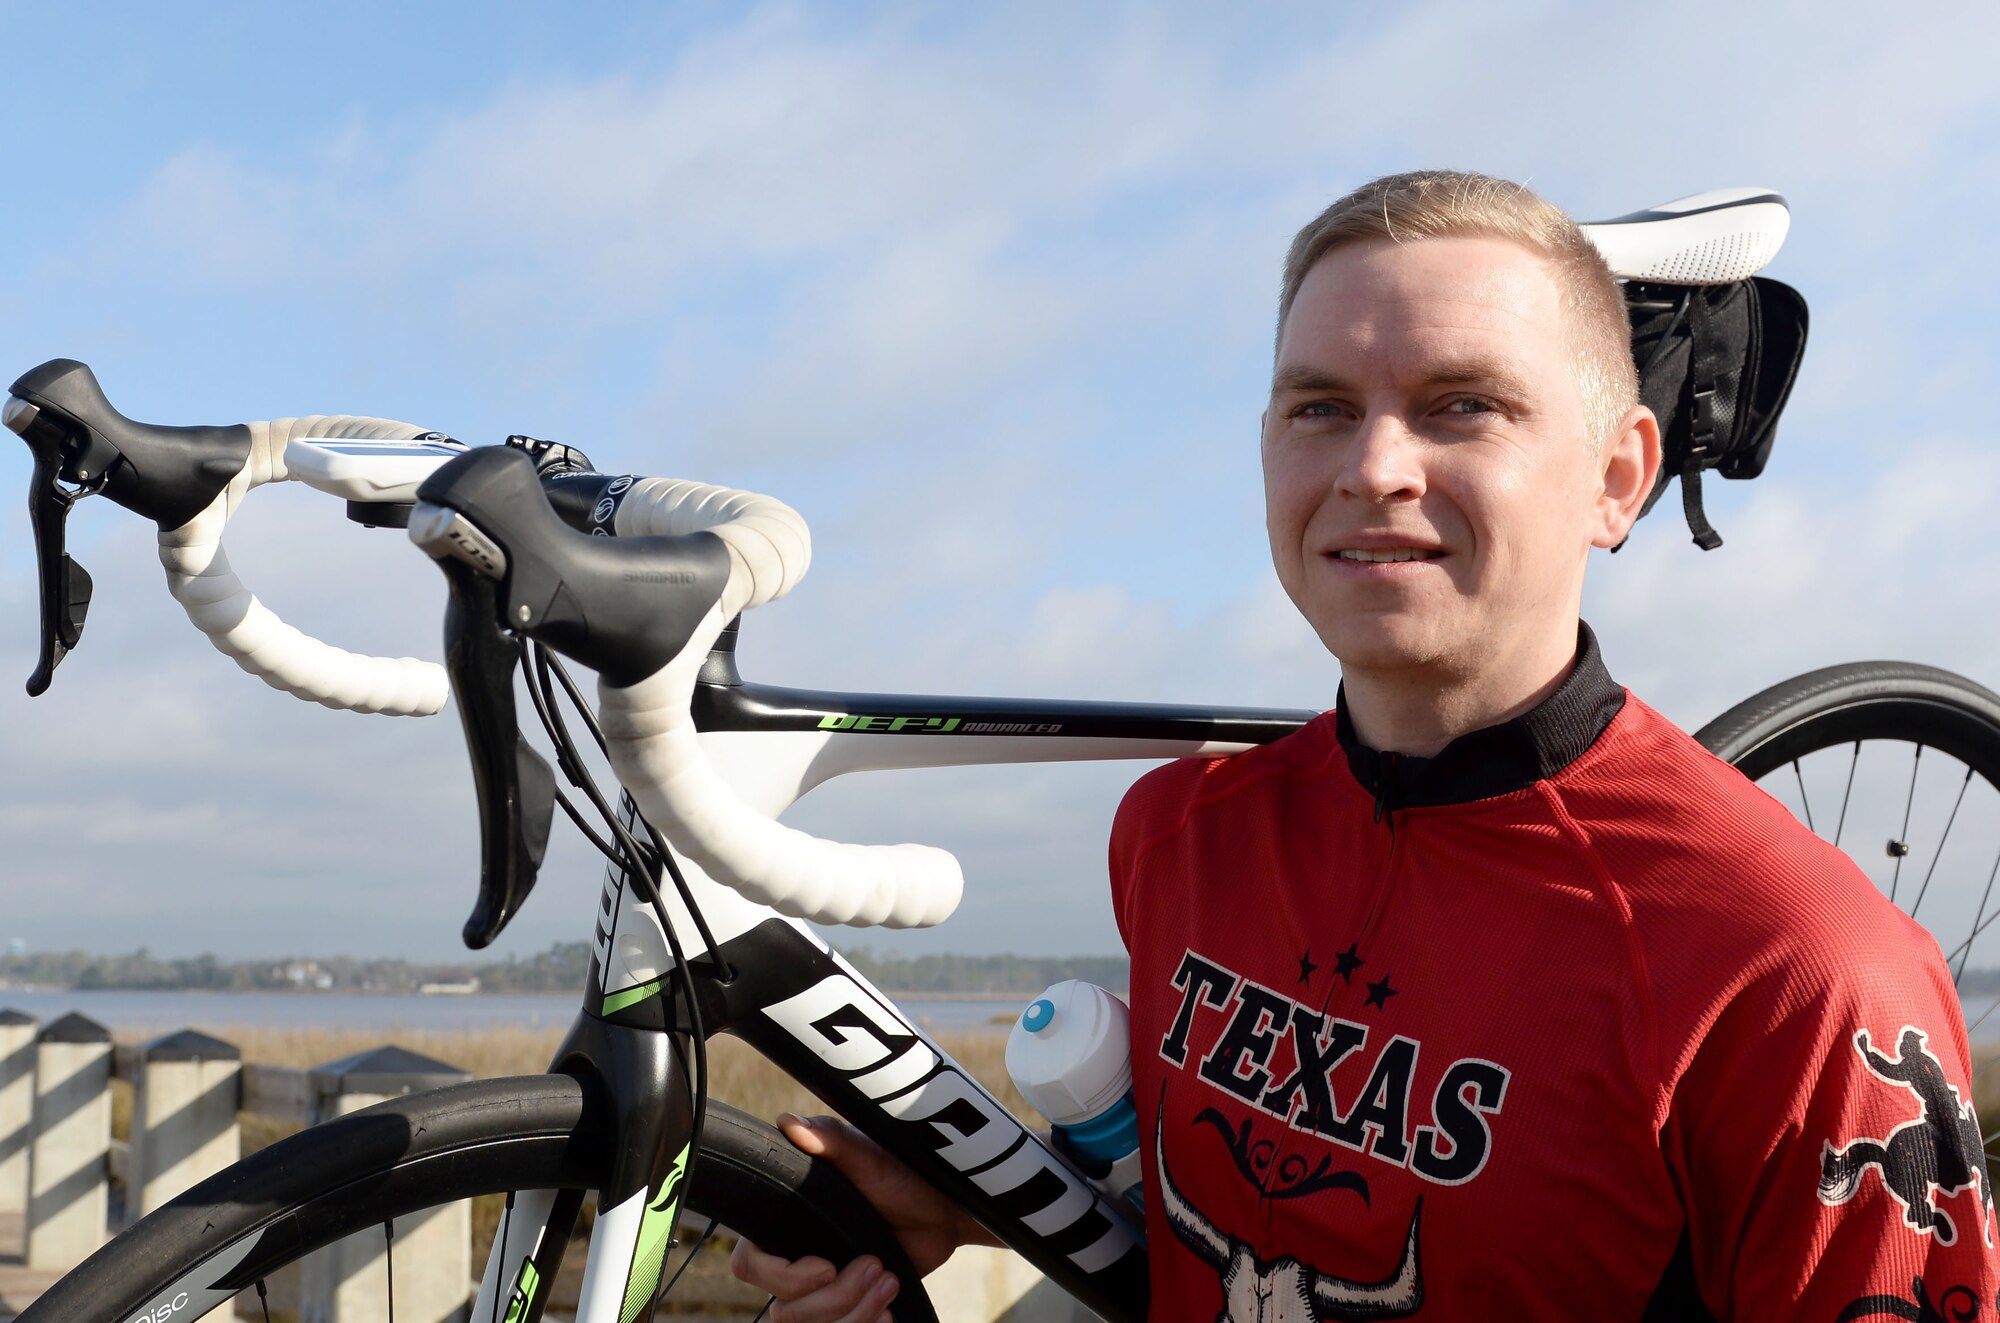 Staff Sgt. Evan Gossell, 338th Training Squadron instructor, poses for a photo with his road bike at the base marina, Feb. 12, 2016, Keesler Air Force Base, Miss. Gossell suffered an Ischemic Stroke in 2013 at age 26. After re-learning how to walk and talk, he became an instructor at Keesler and was recently accepted into the Air Force Cycling Team.